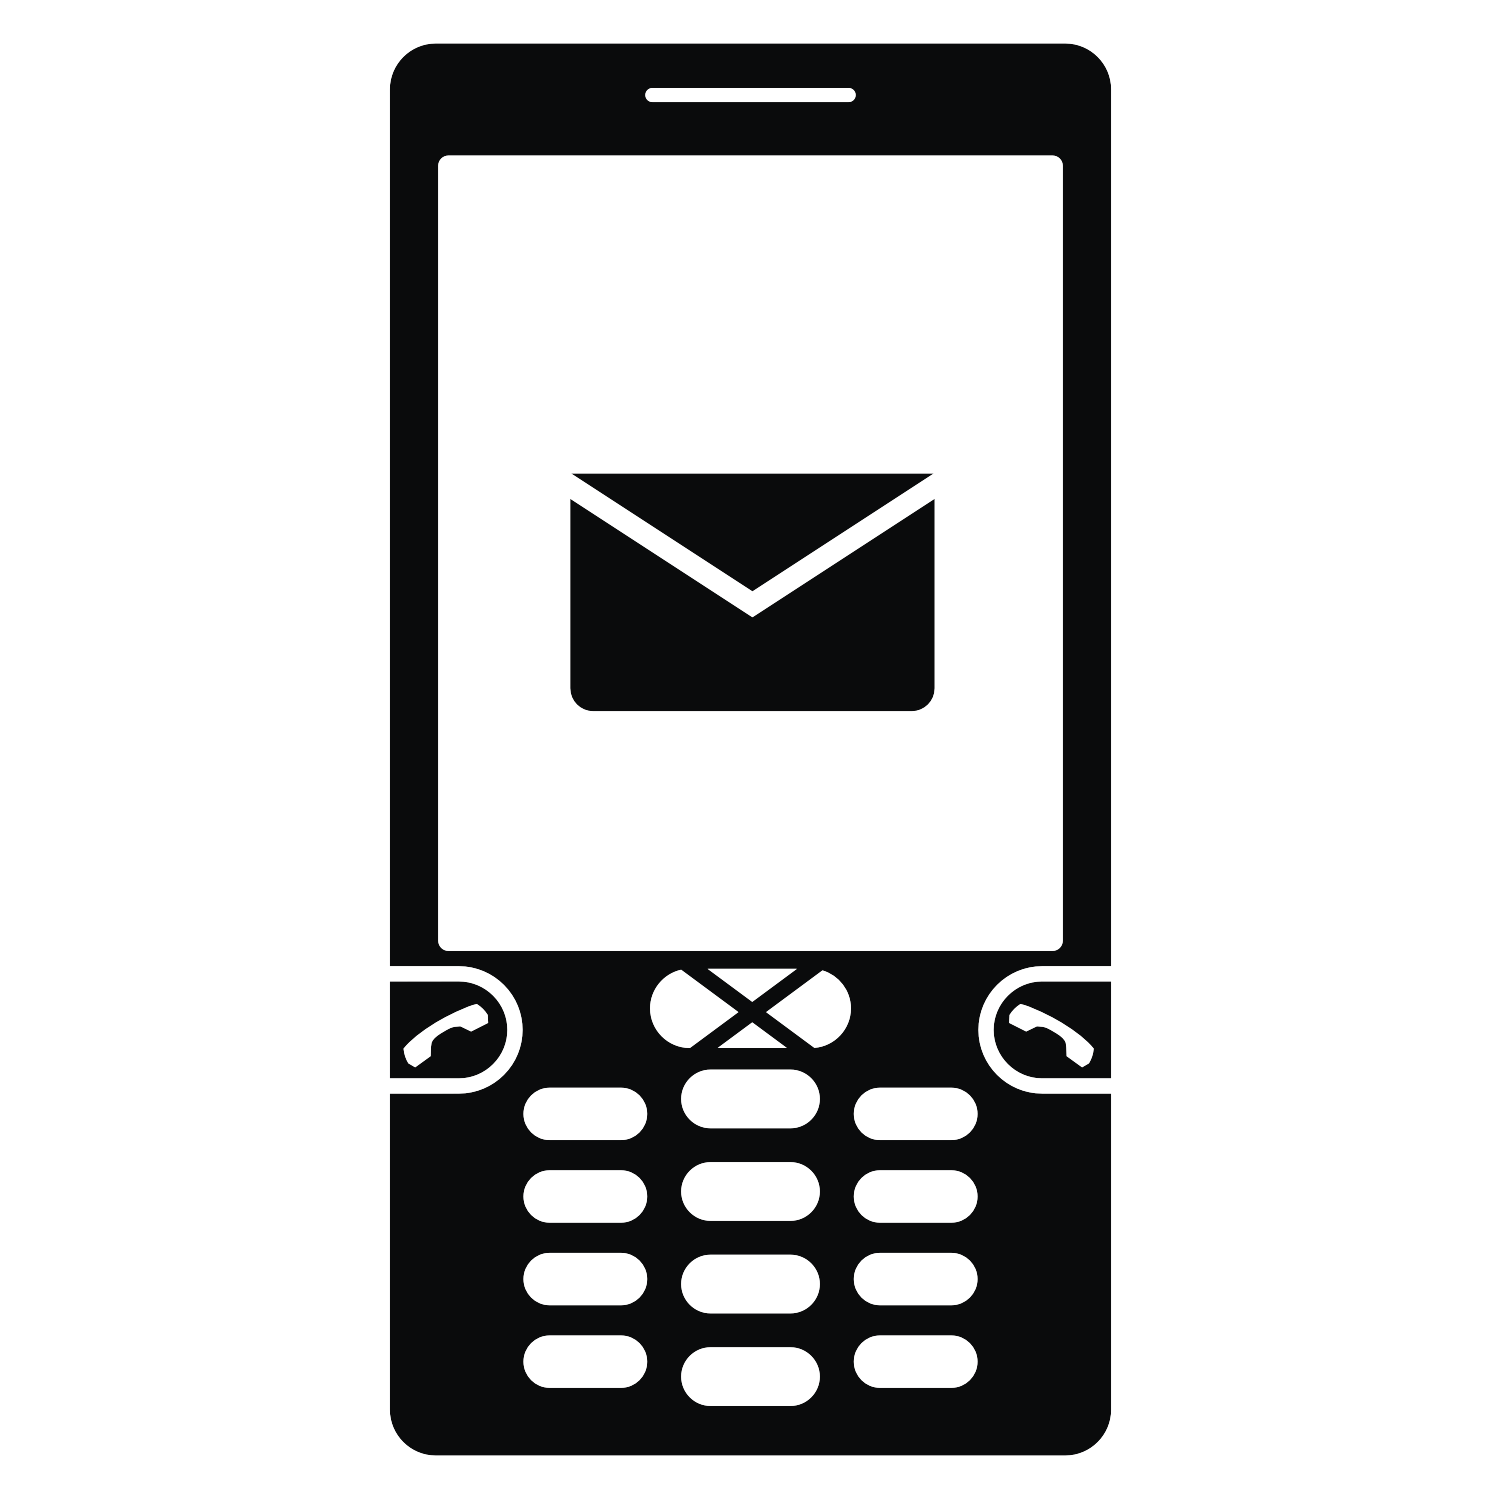 Telephone Vector Icon Free - ClipArt Best